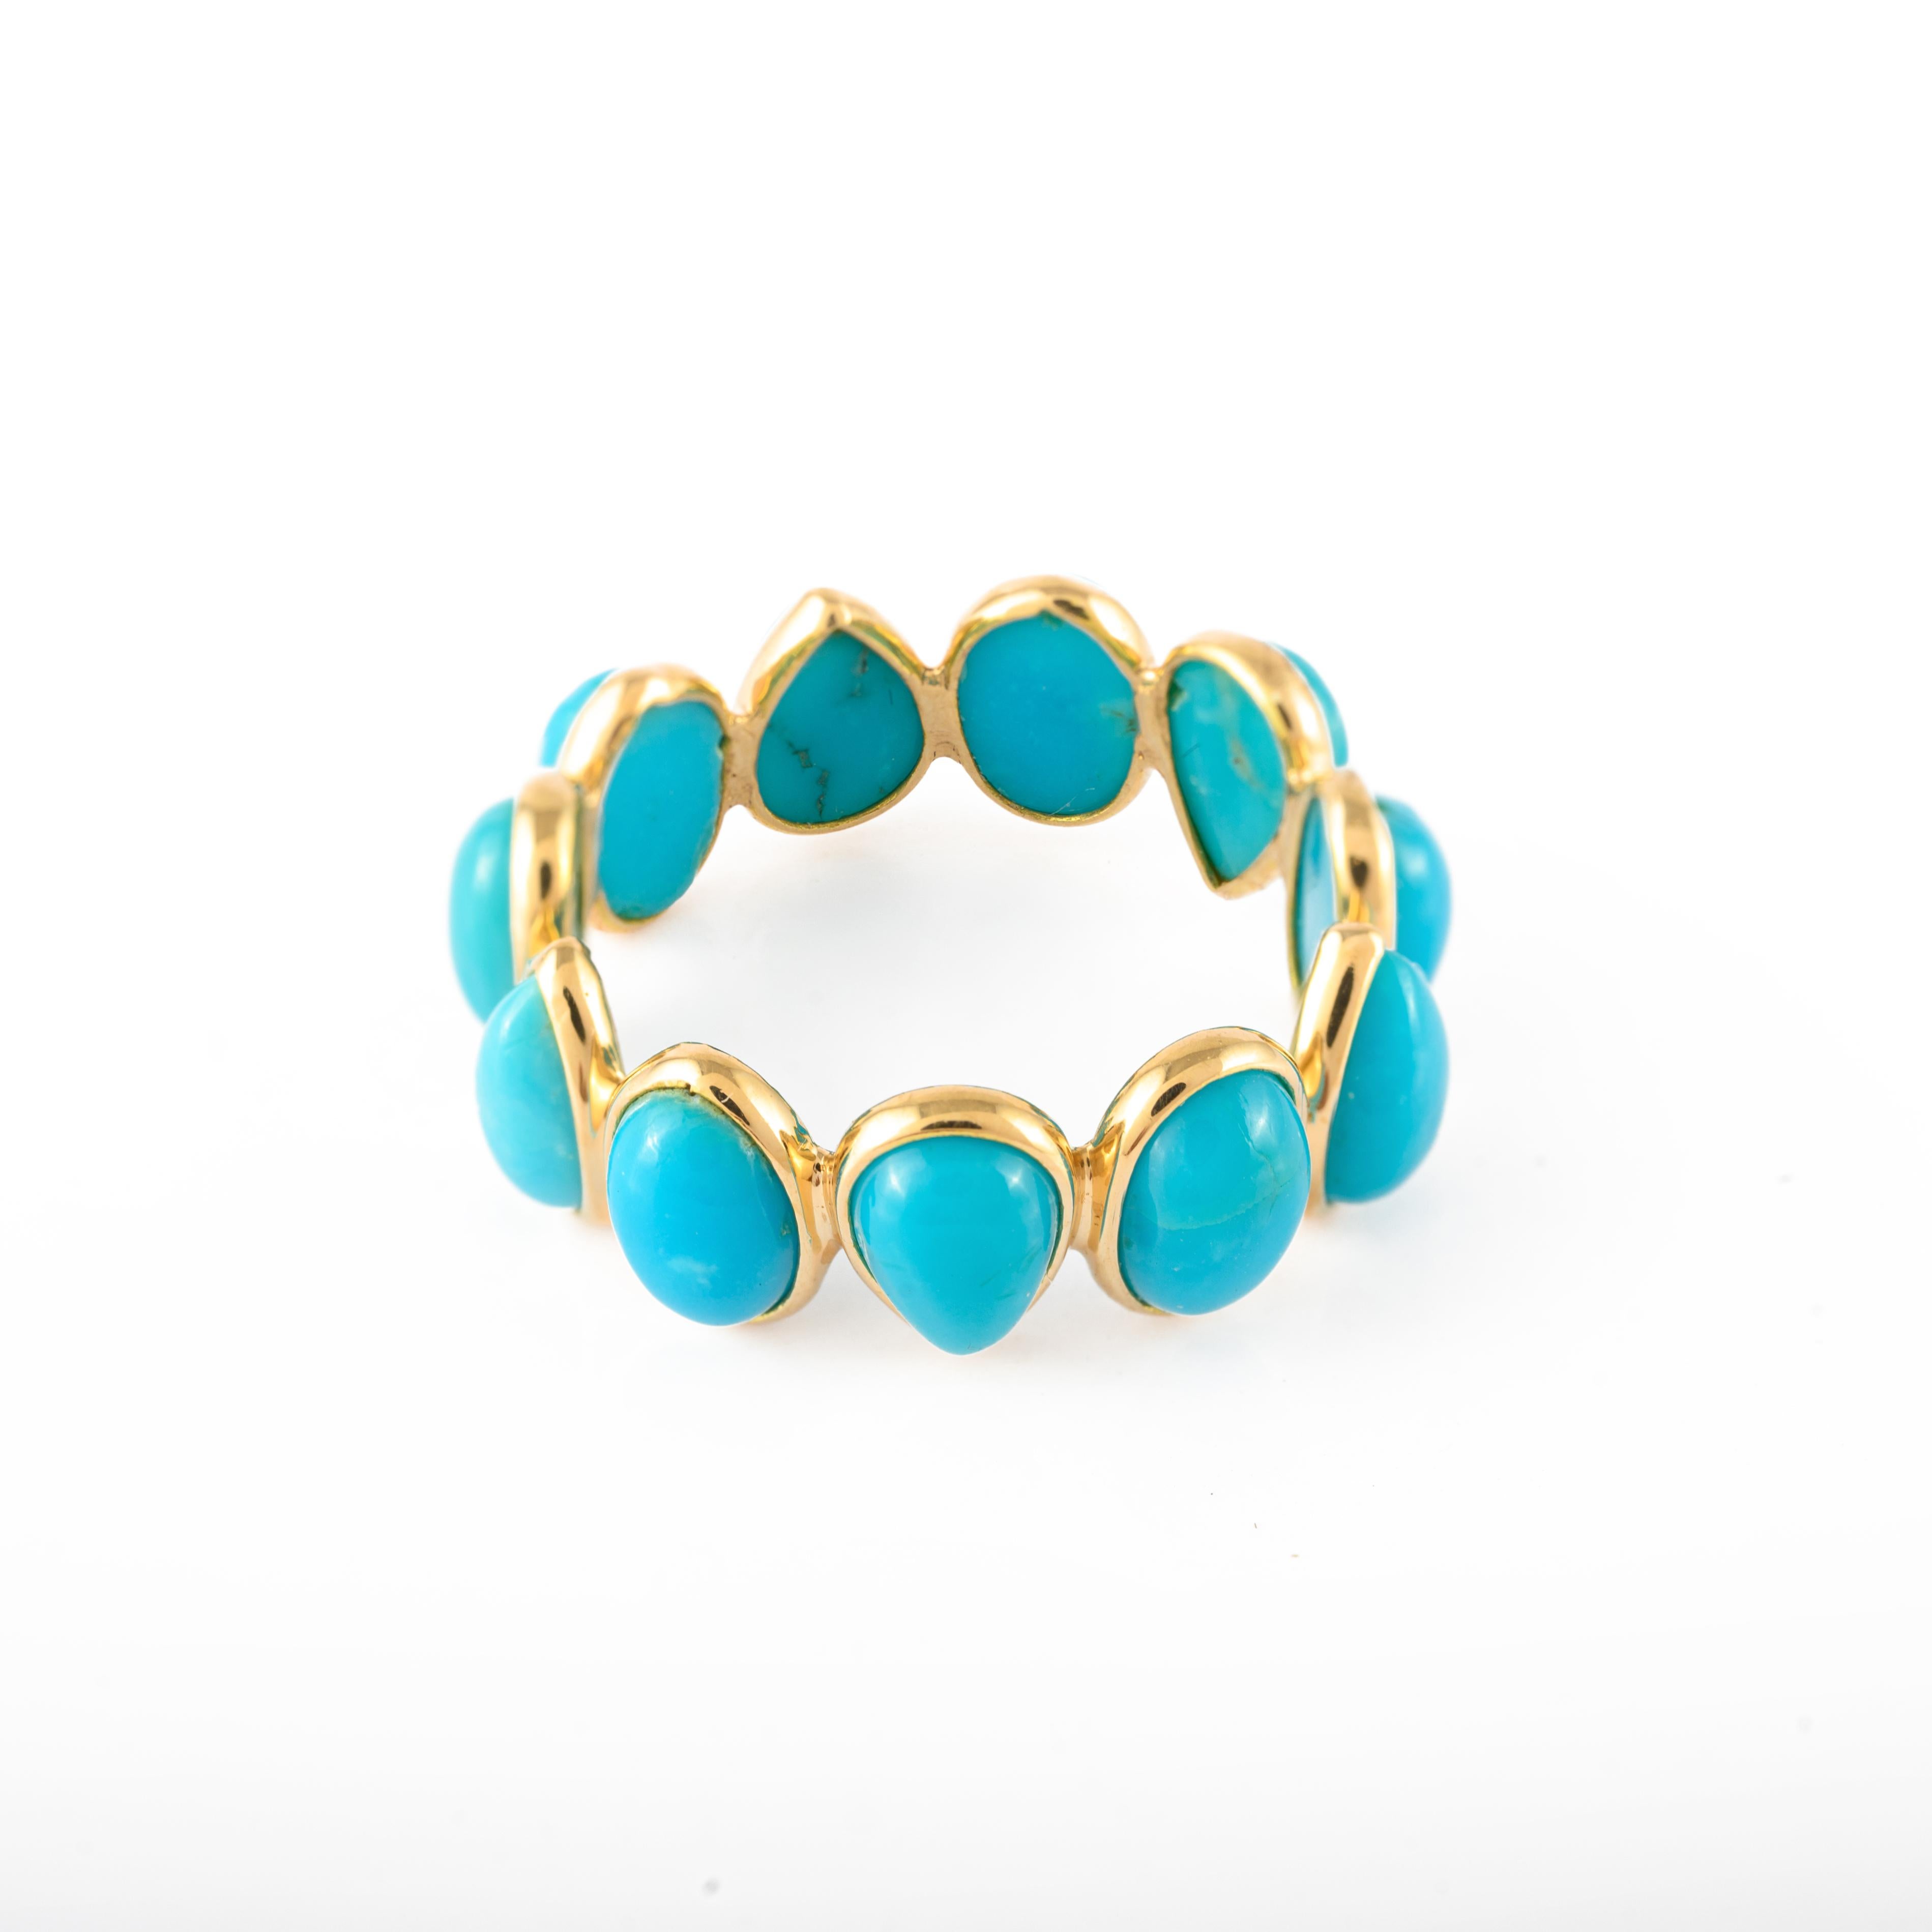 For Sale:  Minimal 18k Yellow Gold 6.2 Carat Turquoise Eternity Band Ring 6